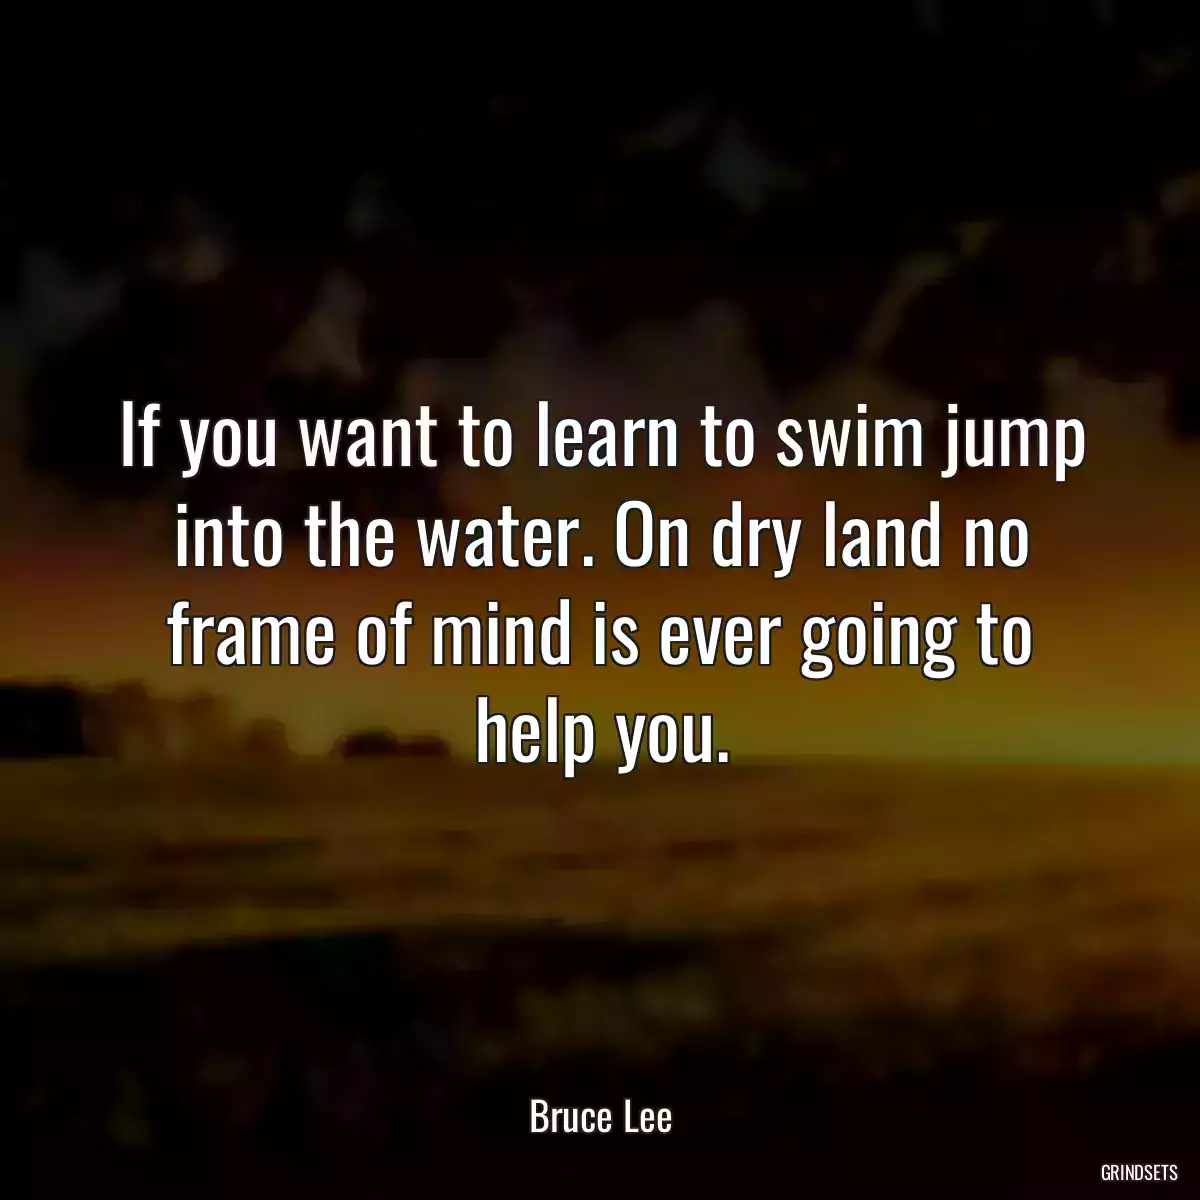 If you want to learn to swim jump into the water. On dry land no frame of mind is ever going to help you.